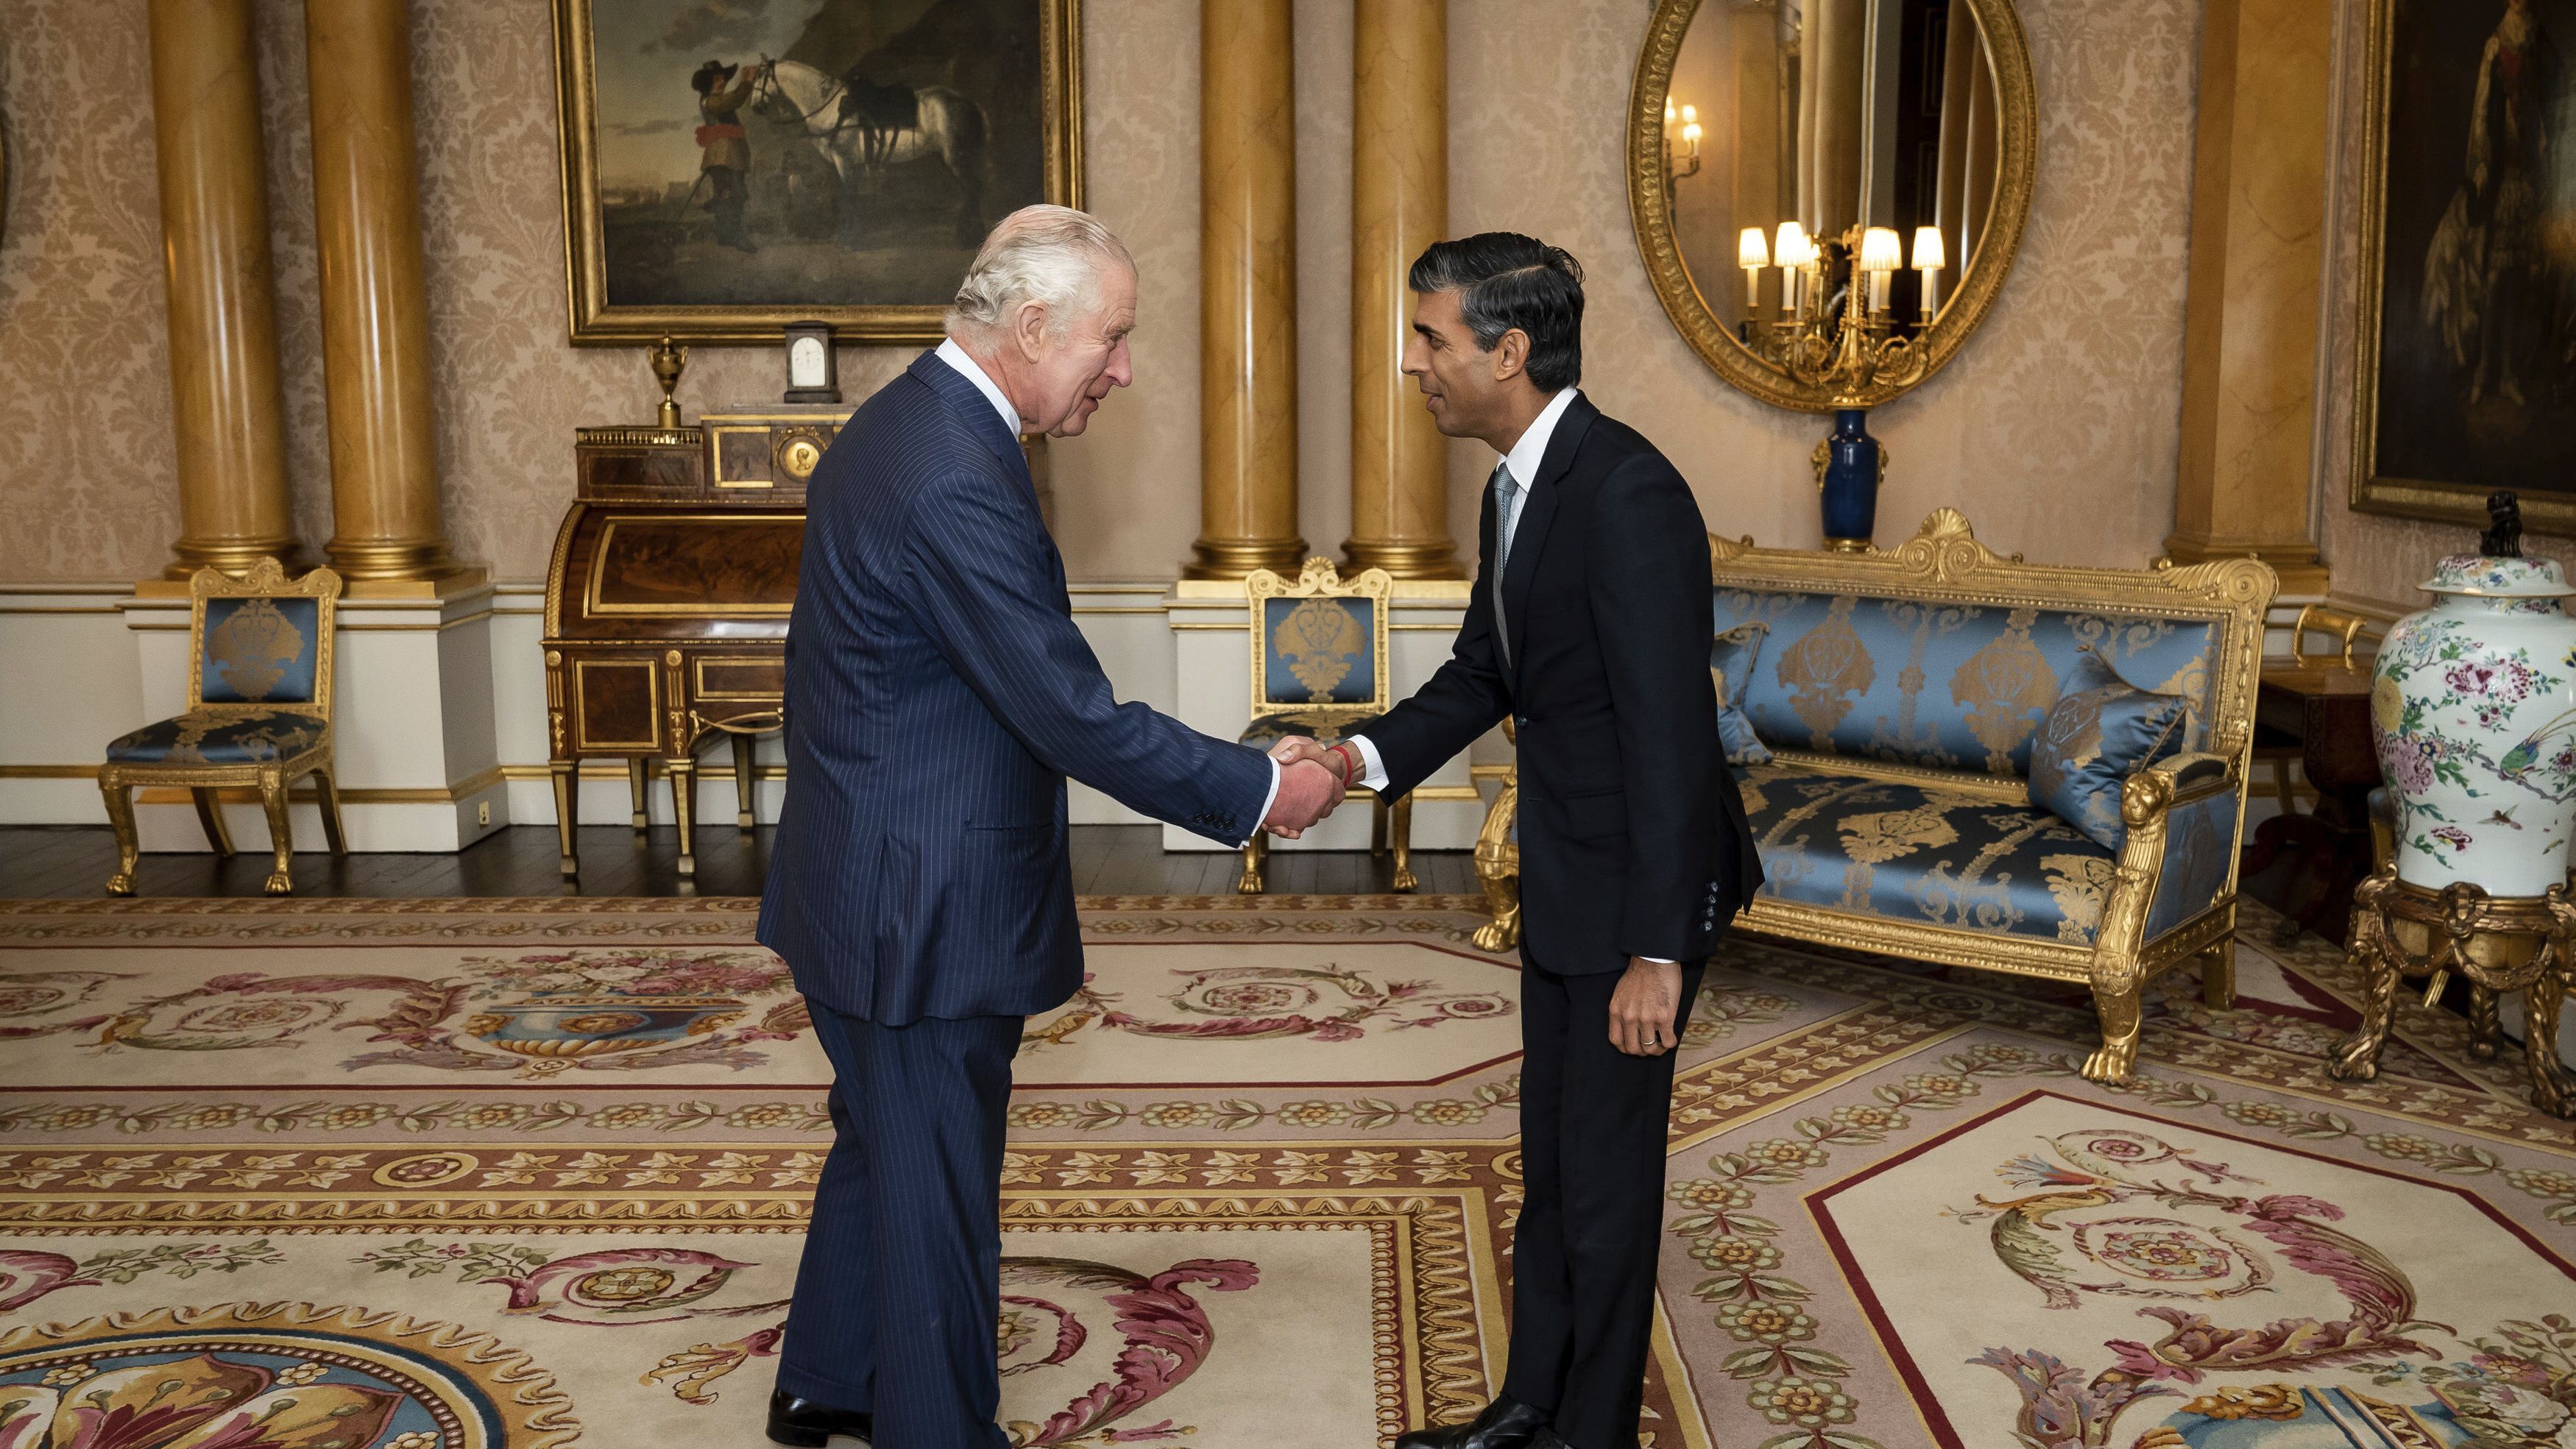 King Charles III welcomed new Prime Minister Rishi Sunak at Buckingham Palace on Tuesday.